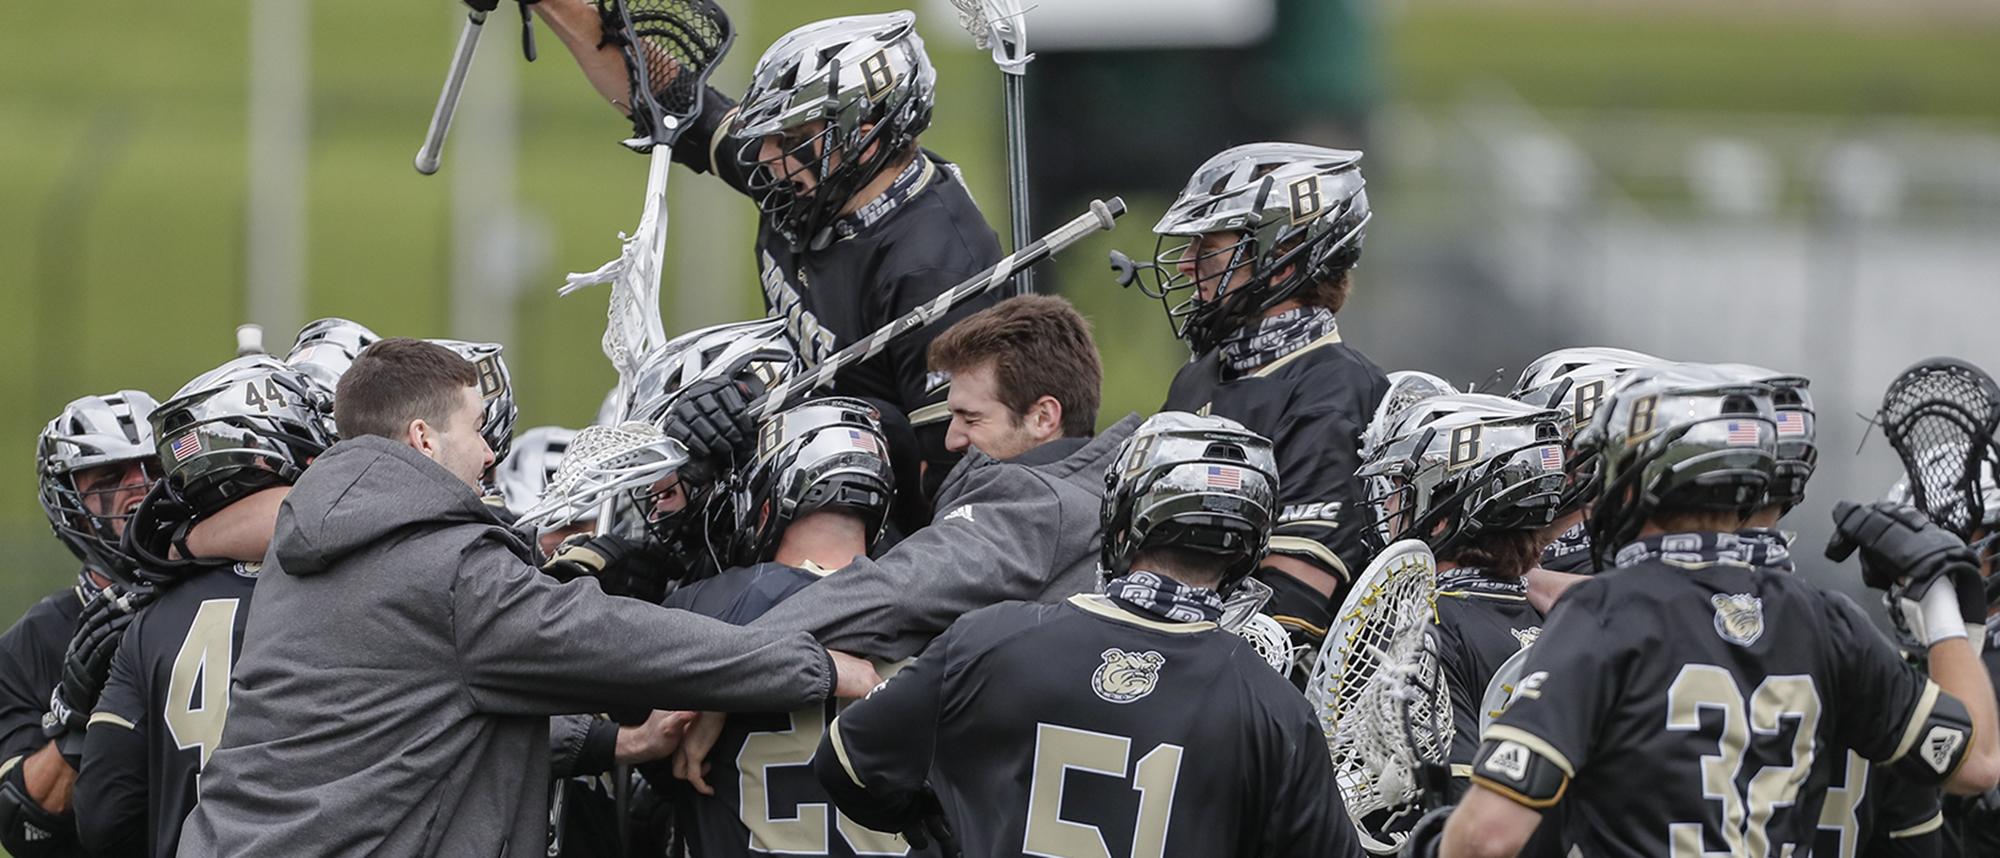 Bryant downs Hobart, plays for NEC title on Saturday